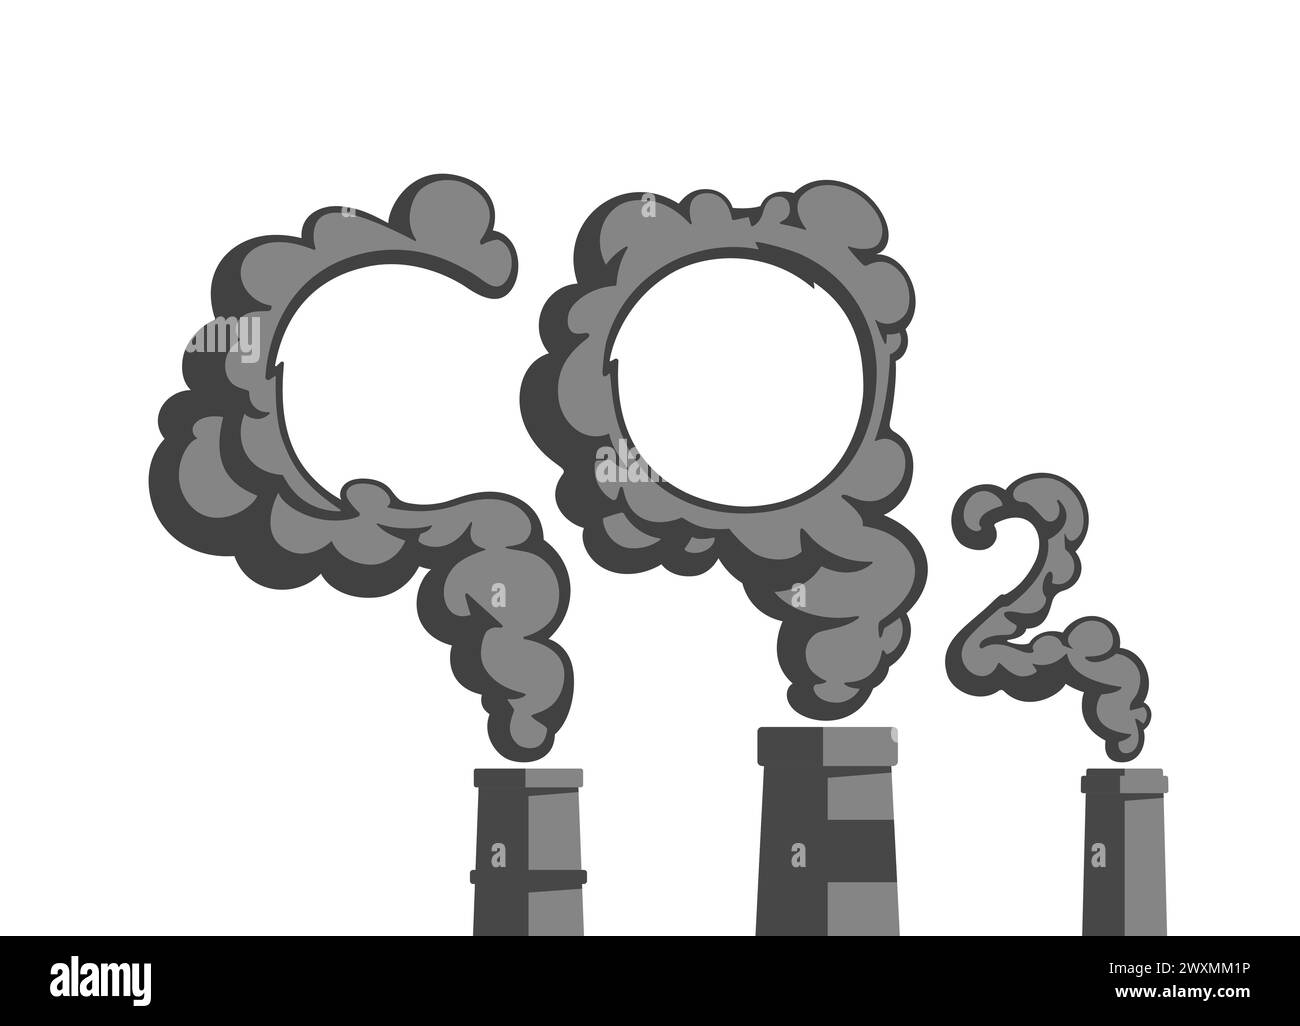 Carbon dioxide (CO2) emissions from industrial factory. Factory smokestacks. Environment pollution concept. Flat vector illustration. Stock Vector